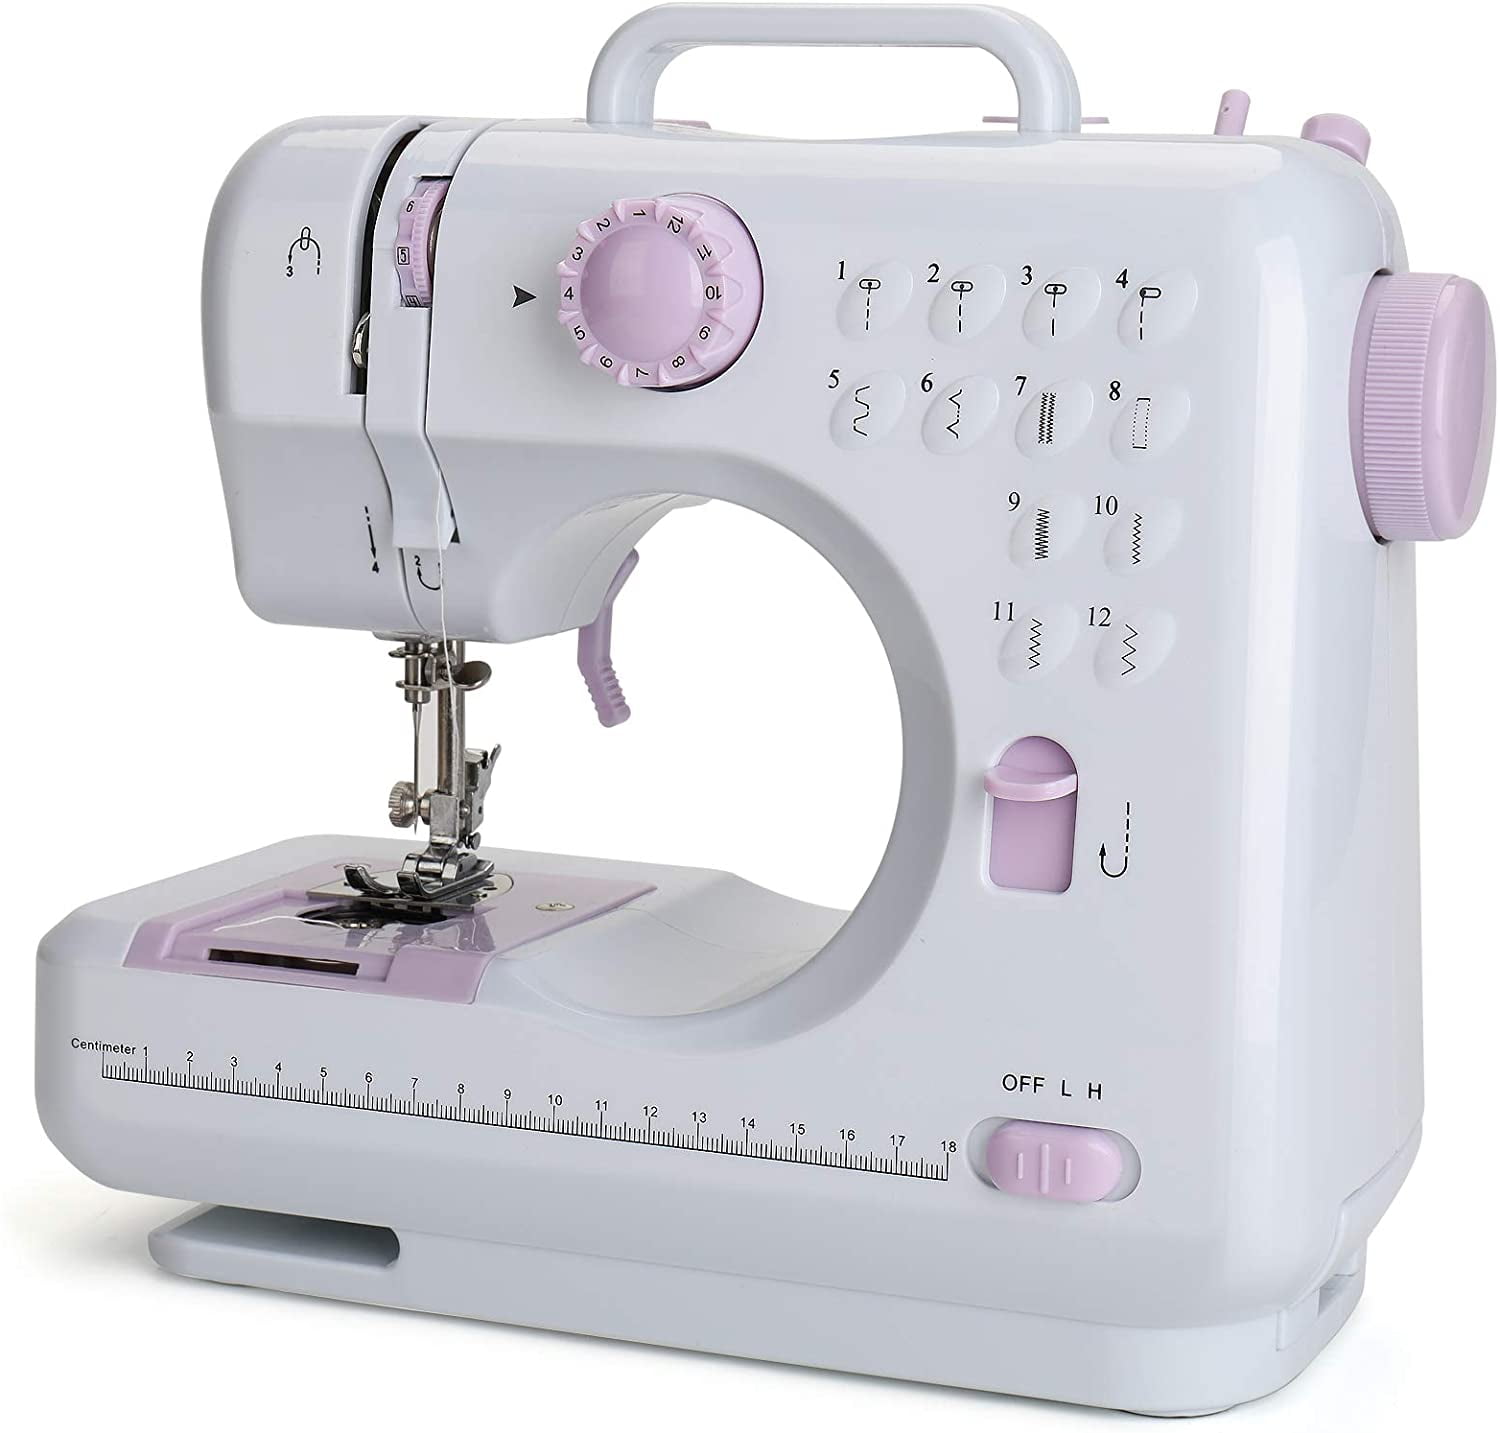 Nikou Mini Sewing Machine, Electric Household Crafting Mending Portable Sewing  Machines, 12 Stitches 2 Speed with Foot Pedal - Perfect For Easy Sewing,  Beginners, Kids (Purple) 